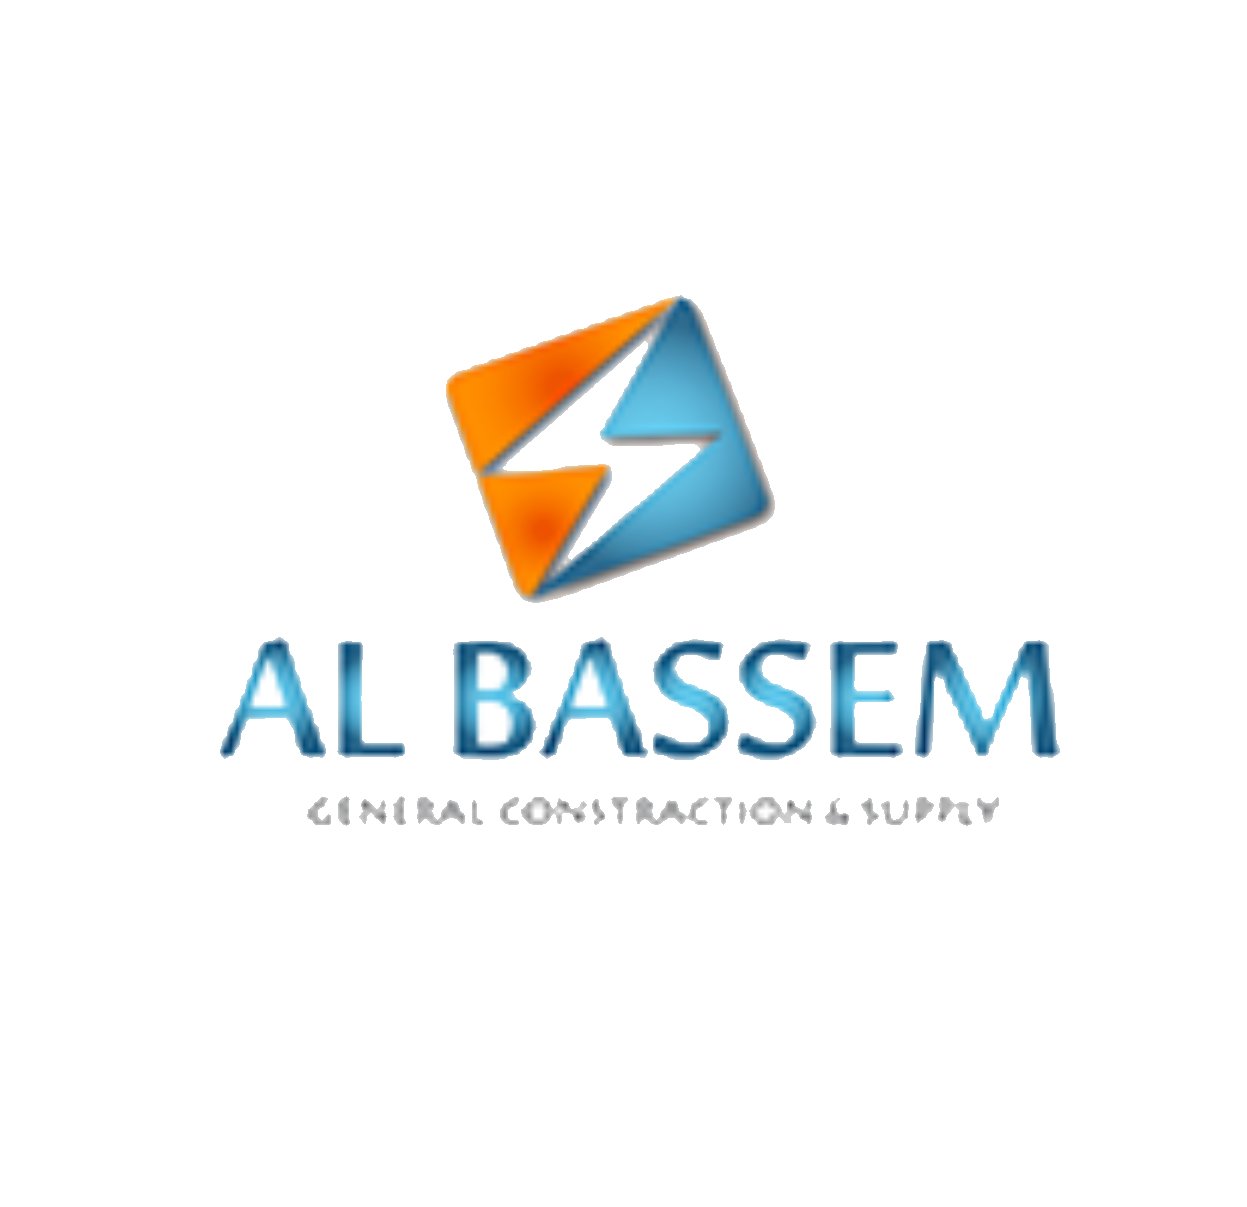 ALBASSEM for general construction and supply